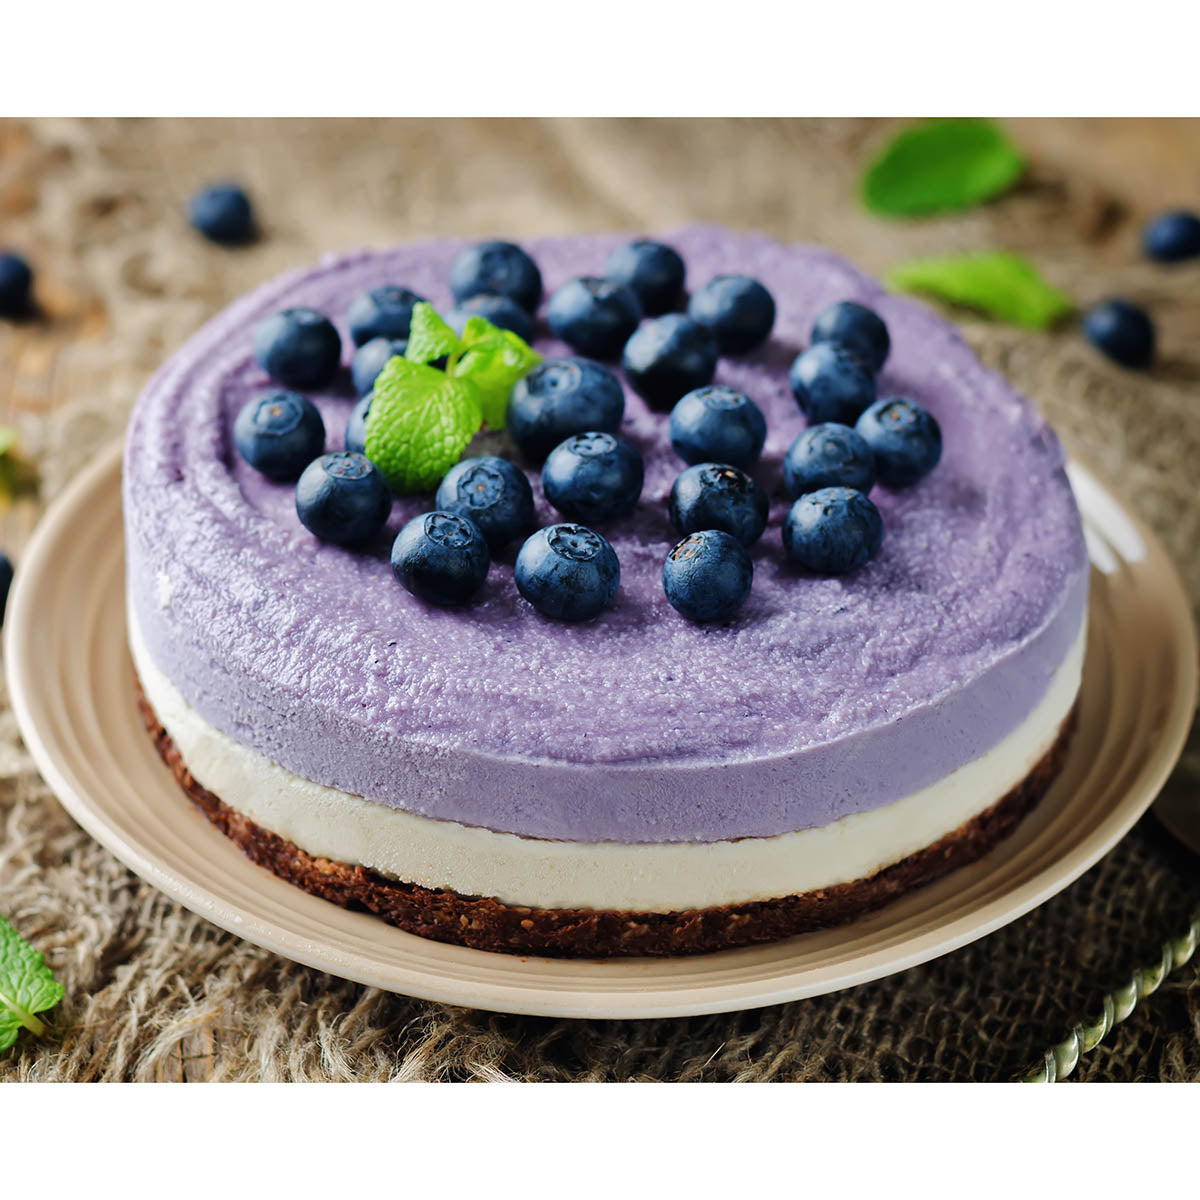 Freeze-Dried Blueberry Powder For Smoothies and Baking